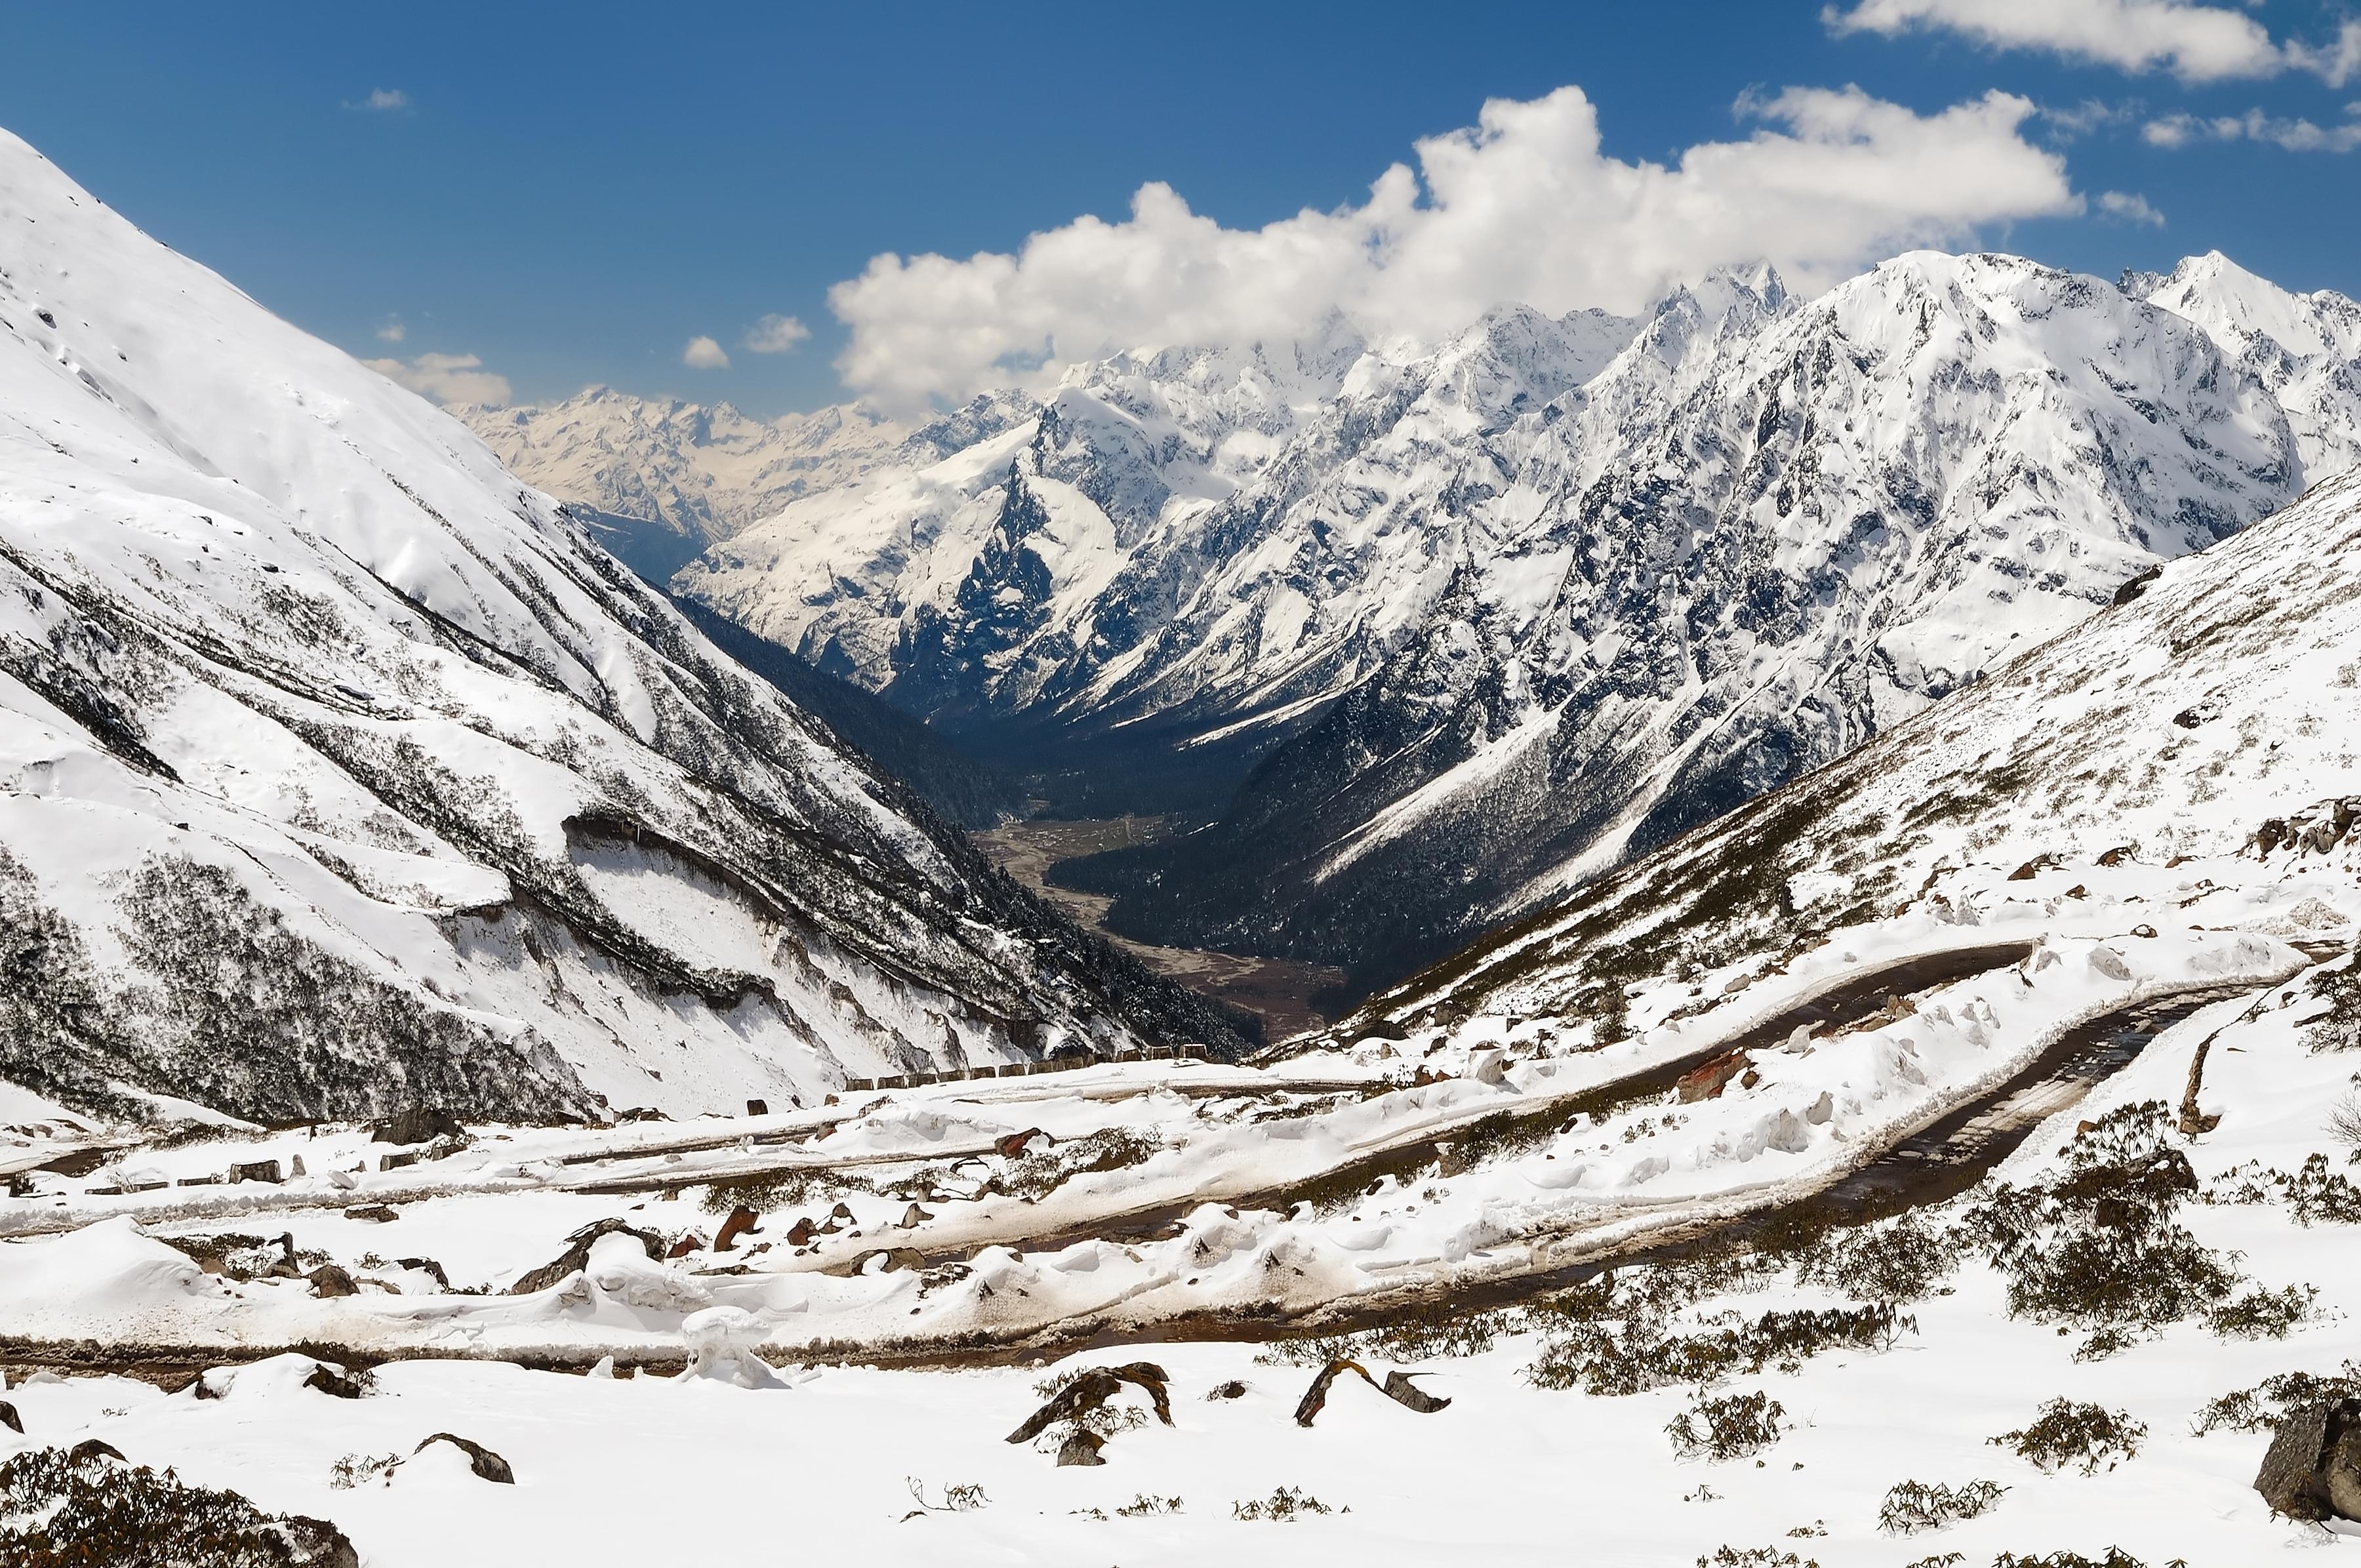 Enjoy the magnificent views of snow capped peaks from the Yumthang Valley